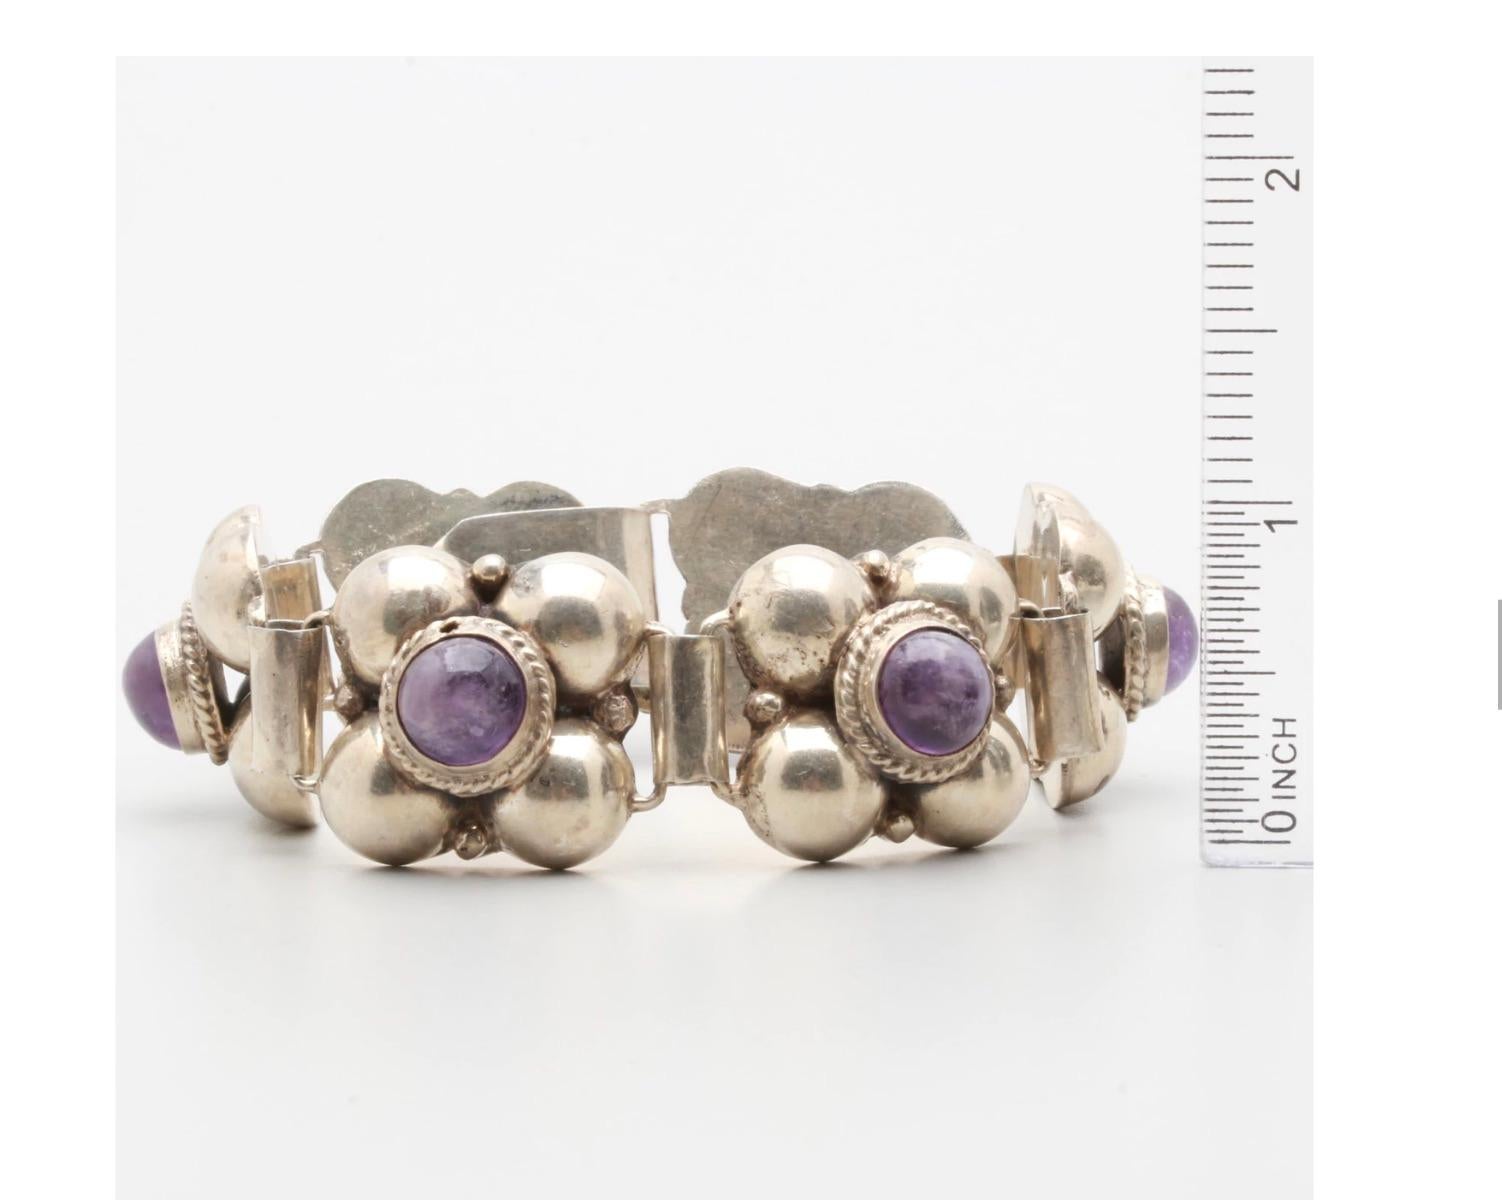 A Mexico sterling silver beautiful large amethyst cabochon link bracelet.
The bracelet was made in Mexico, and features 6 linked segments composed of half-spheres topped by 6 bezel-set amethyst with rope detail, a hook and eye closure.   Surely